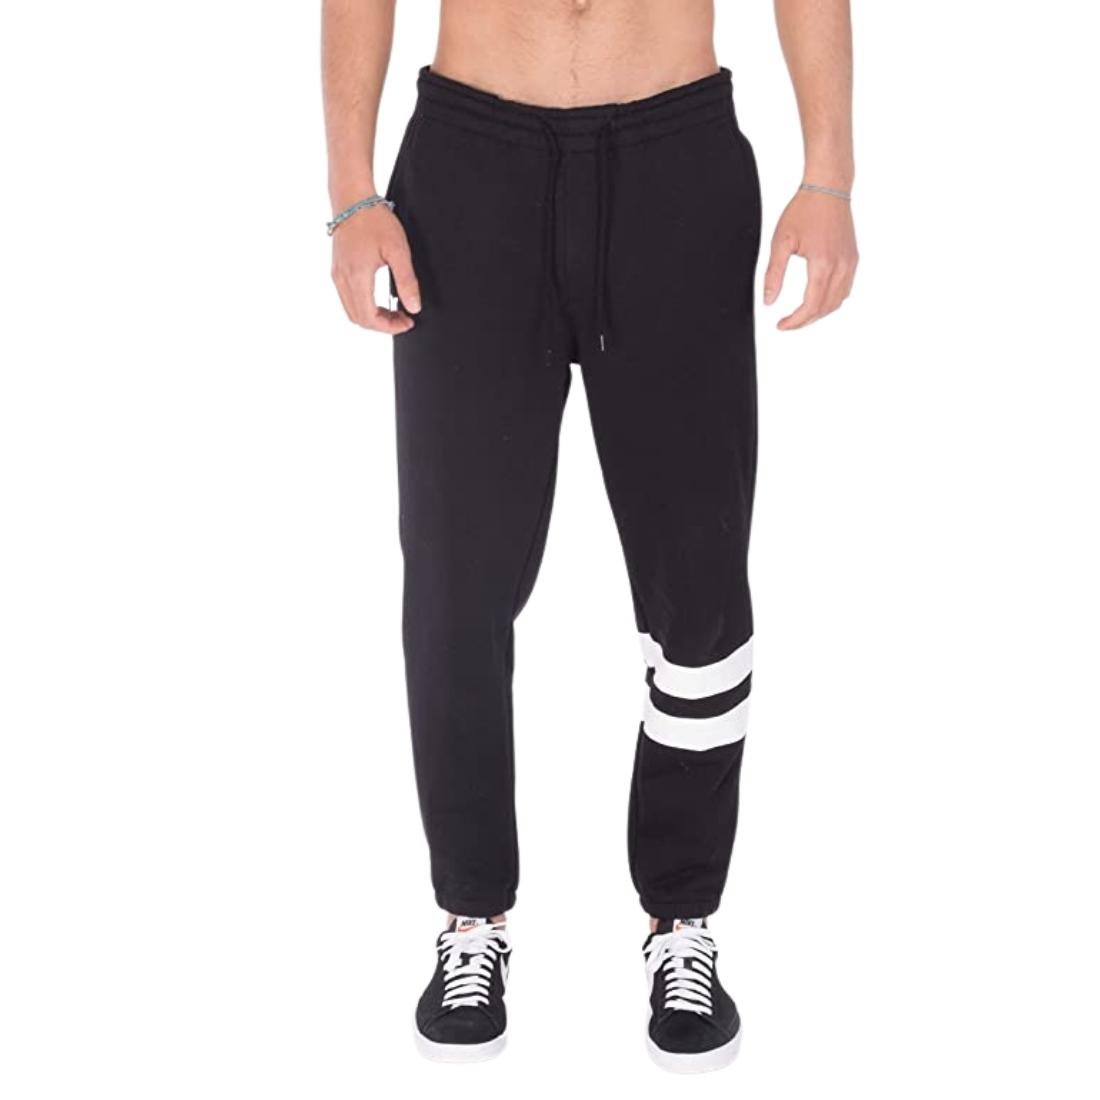 Hurley Oceancare Block Party Fleece Pant Jogger - Black - Mens Joggers by Hurley